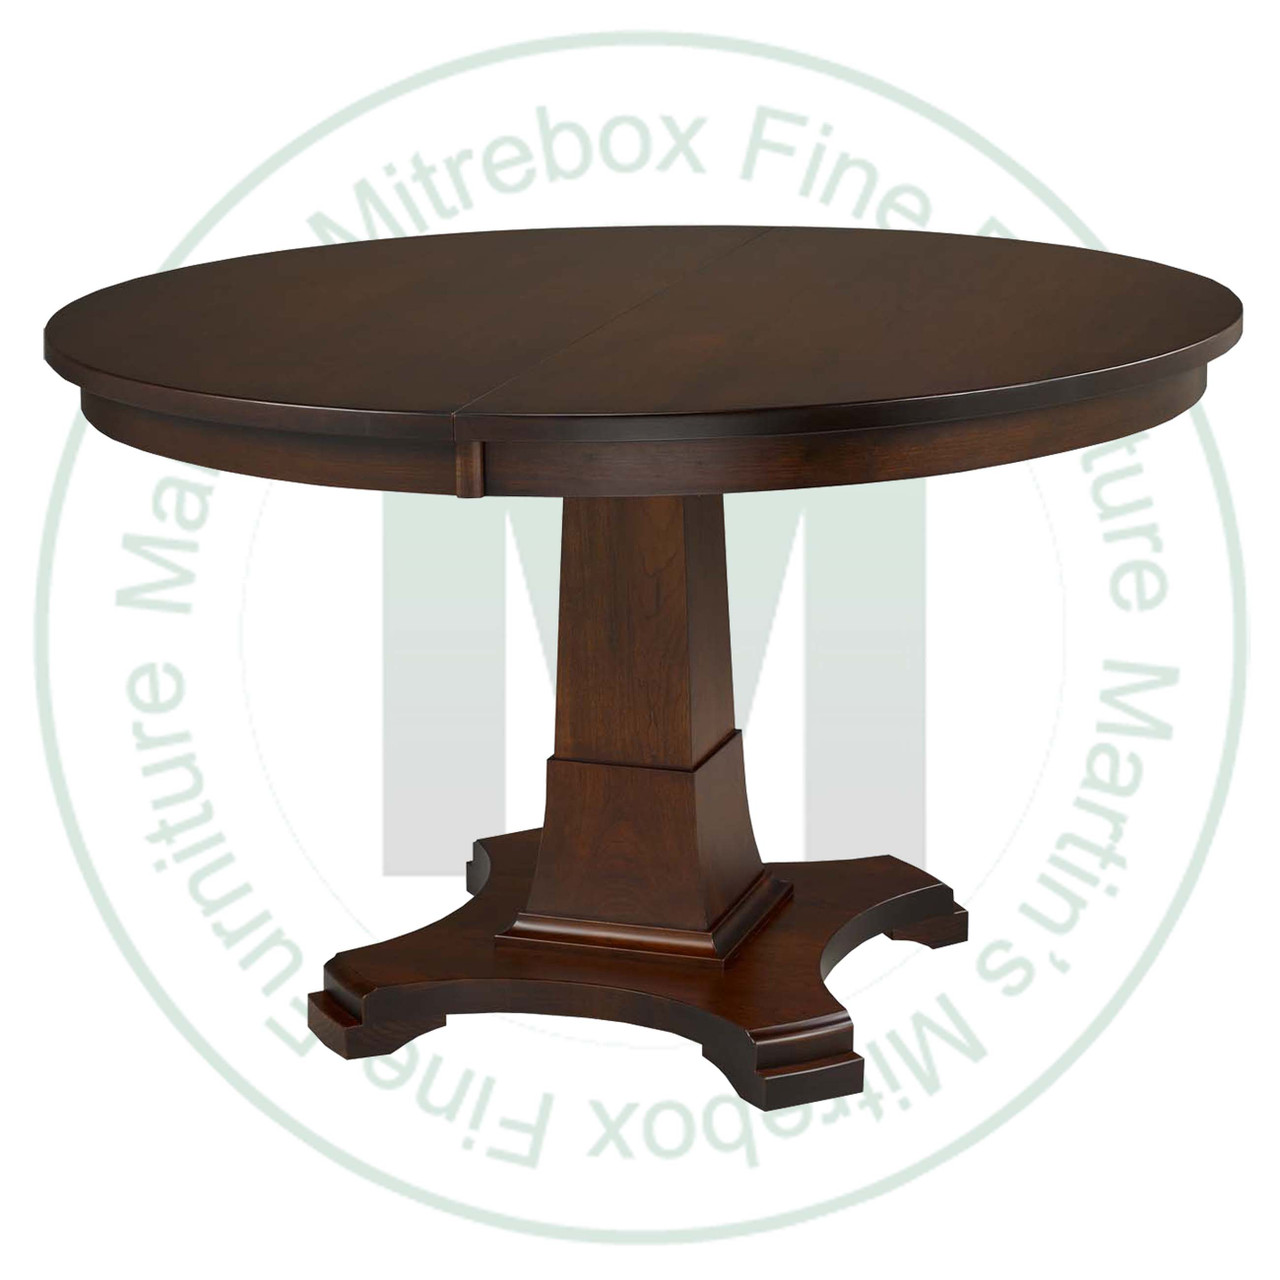 Wormy Maple Abbey Single Pedestal Table 36''D x 48''W x 30''H With 2 - 12'' Leaves. Table Has 1'' Thick Top